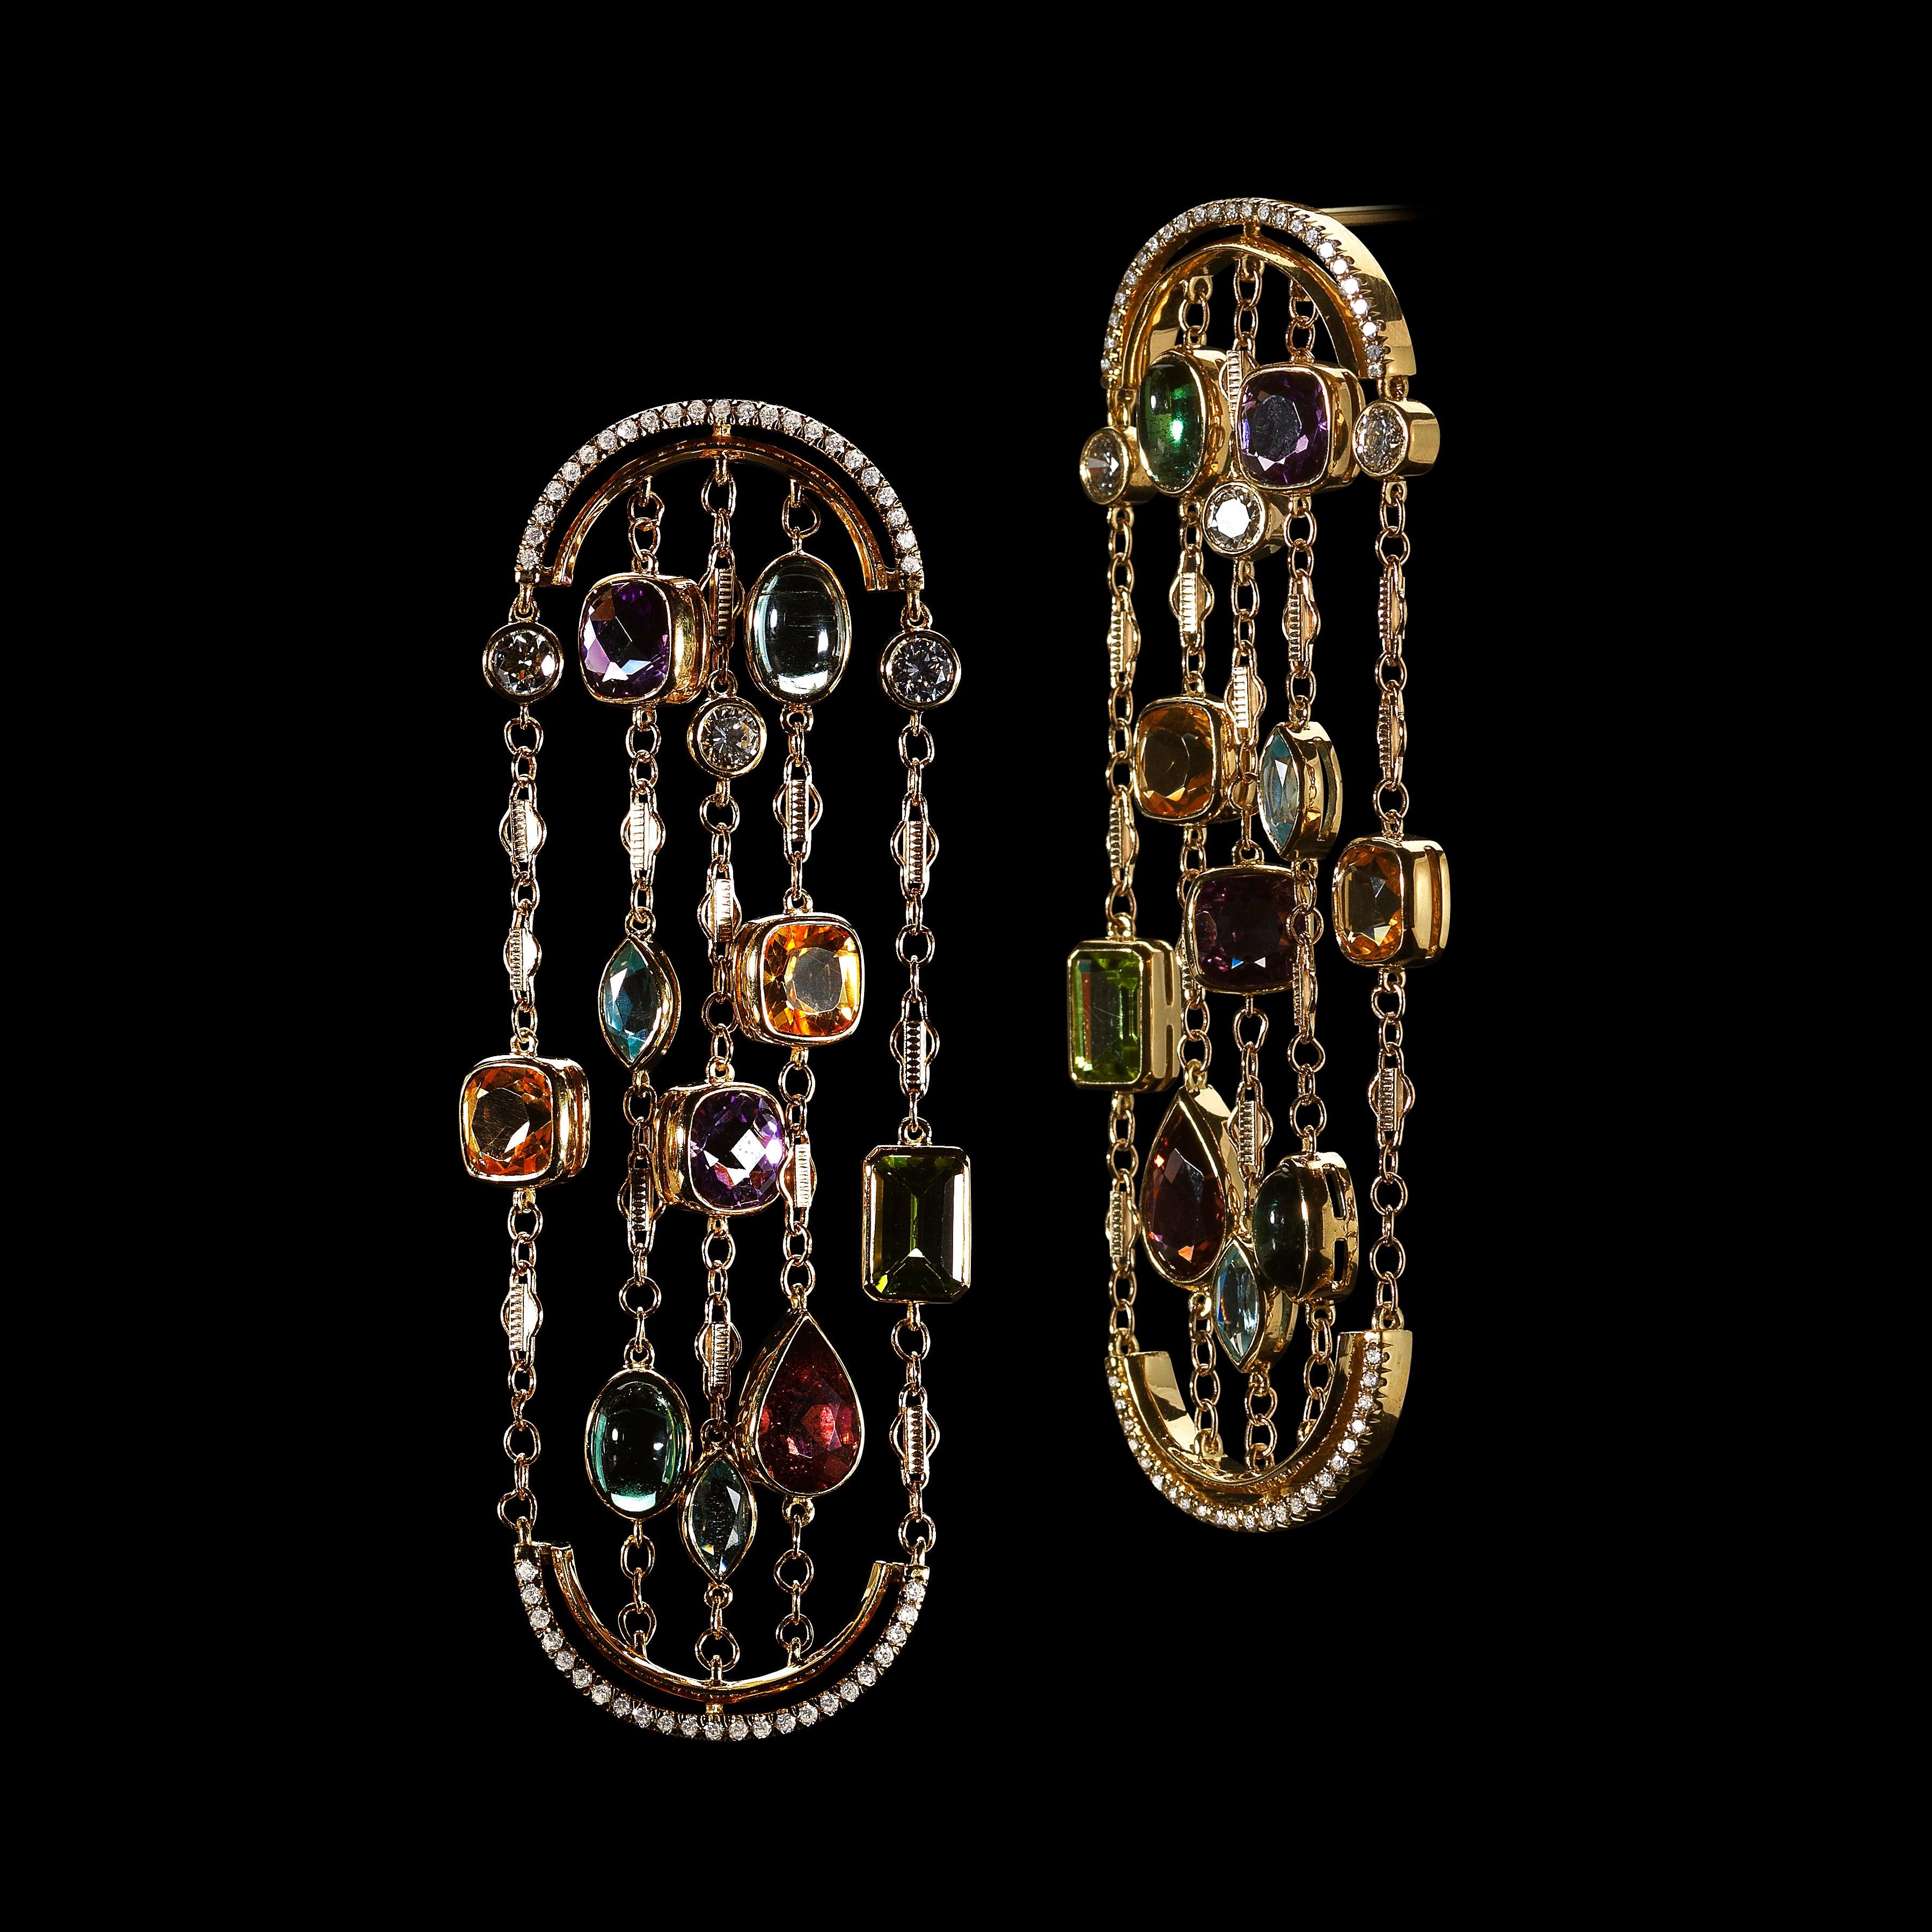 Diamond & Precious Stones Sautoir Arched Earrings set with a mixture of Brilliant-cut Diamonds and fancy shape Aquas, Citrines, Green cabochon and six 5mm snowflake charms set with melee diamonds. Each earring suspended by Alexandra Mor signature